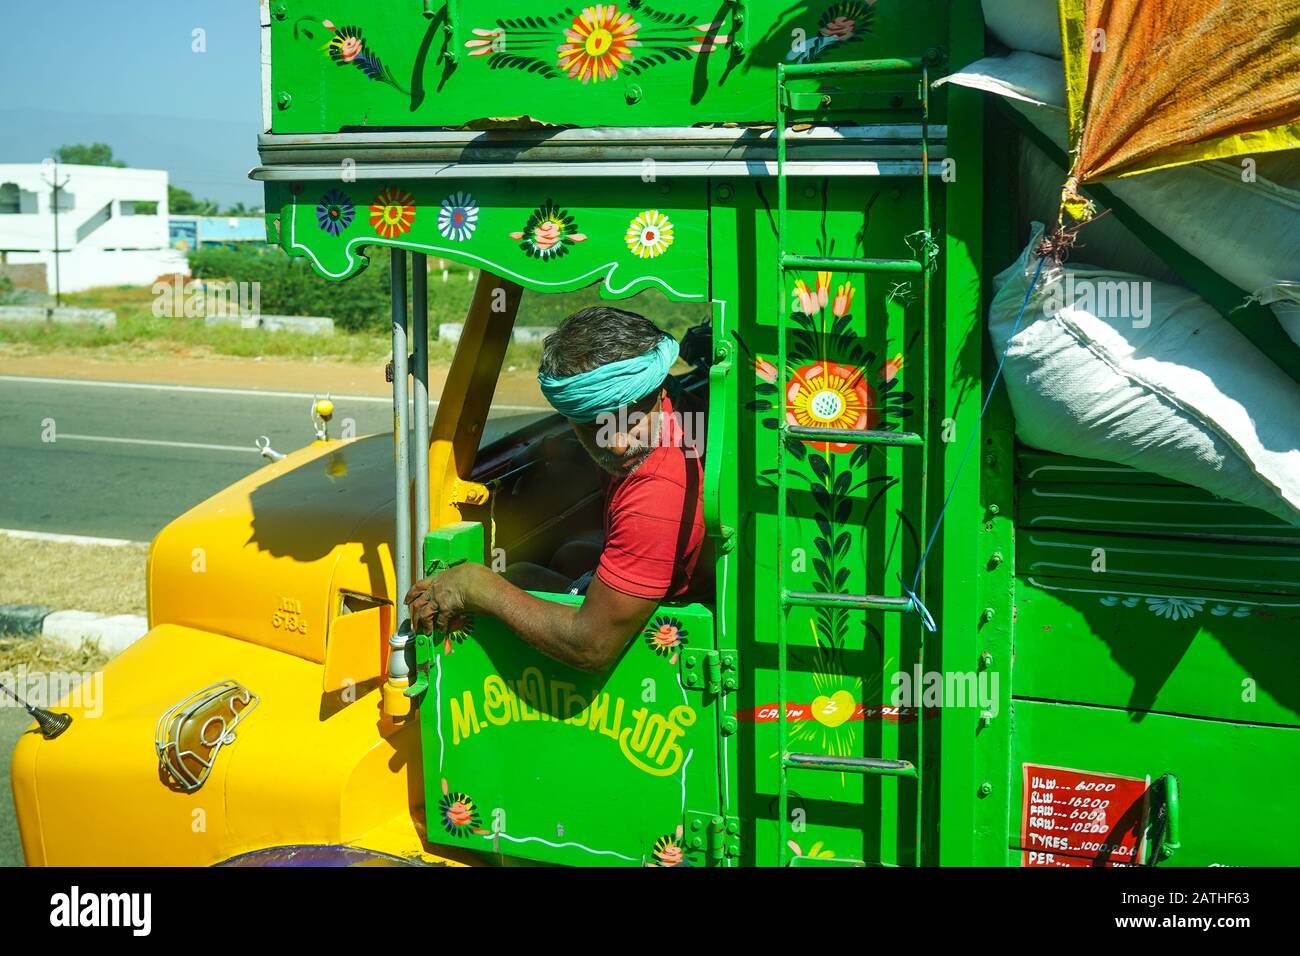 A man in a lorry in Kerala. From a series of travel photos in Kerala, South India. Photo date: Sunday, January 12, 2020. Photo: Roger Garfield/Alamy Stock Photo